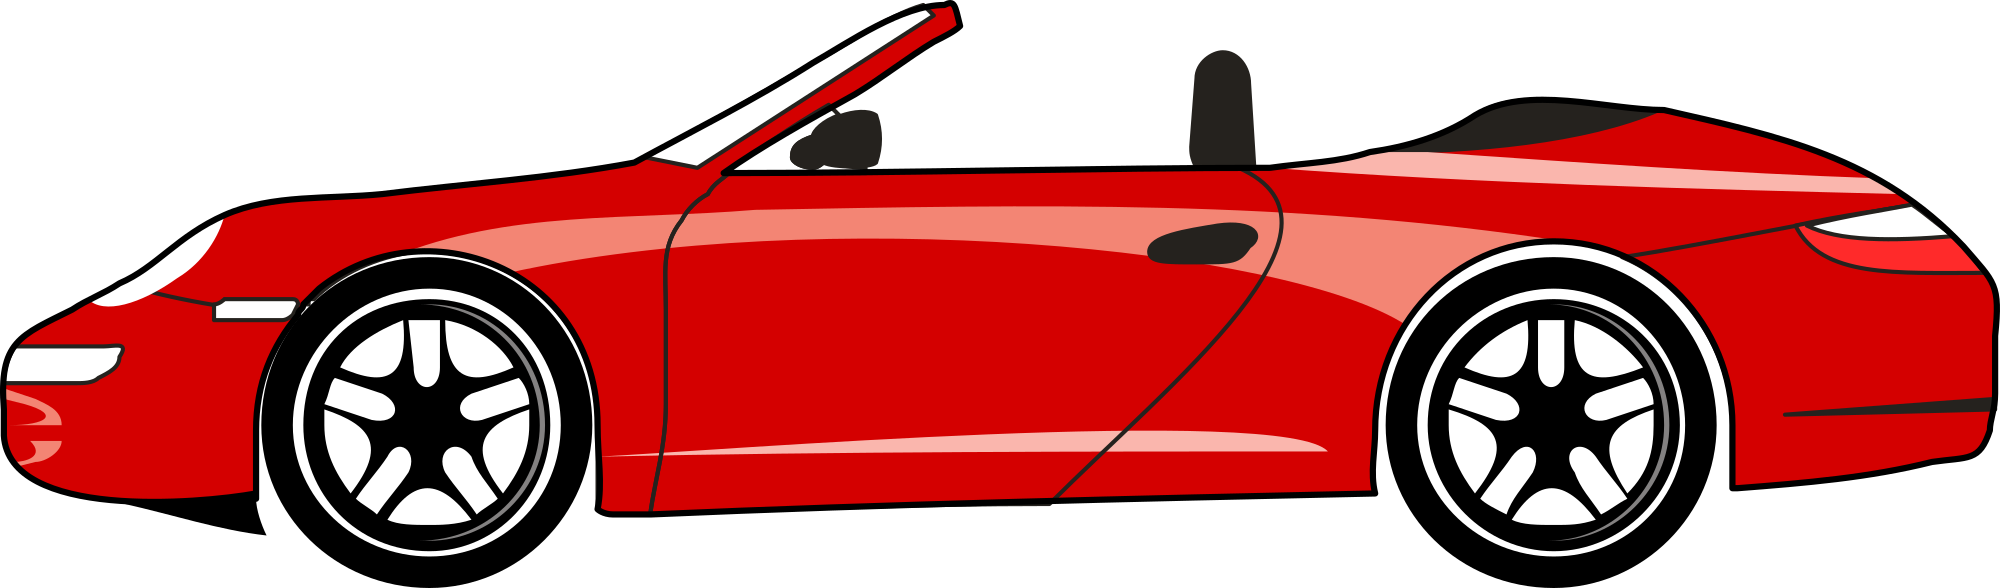 Free red sports car clipart 